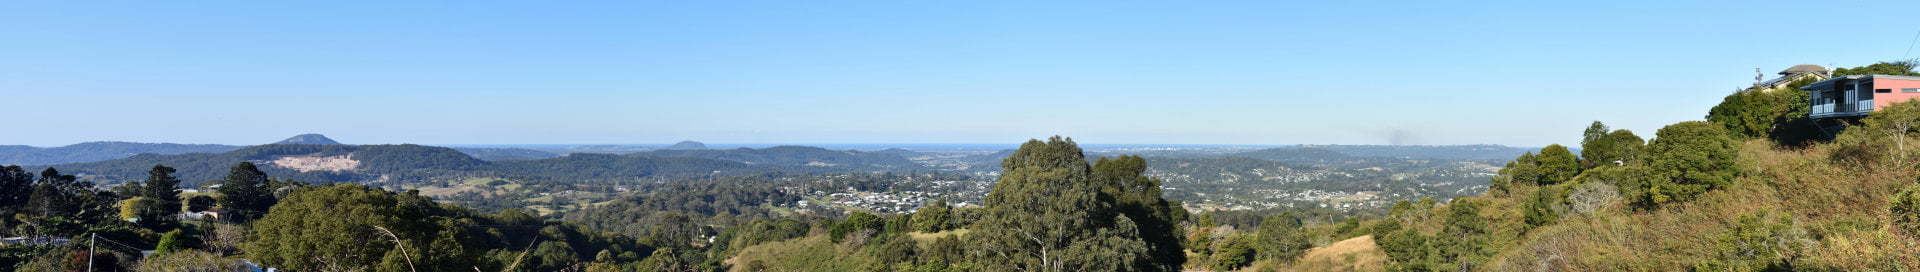 Panorama view from Kanyana Park, looking over Nambour through to the coast